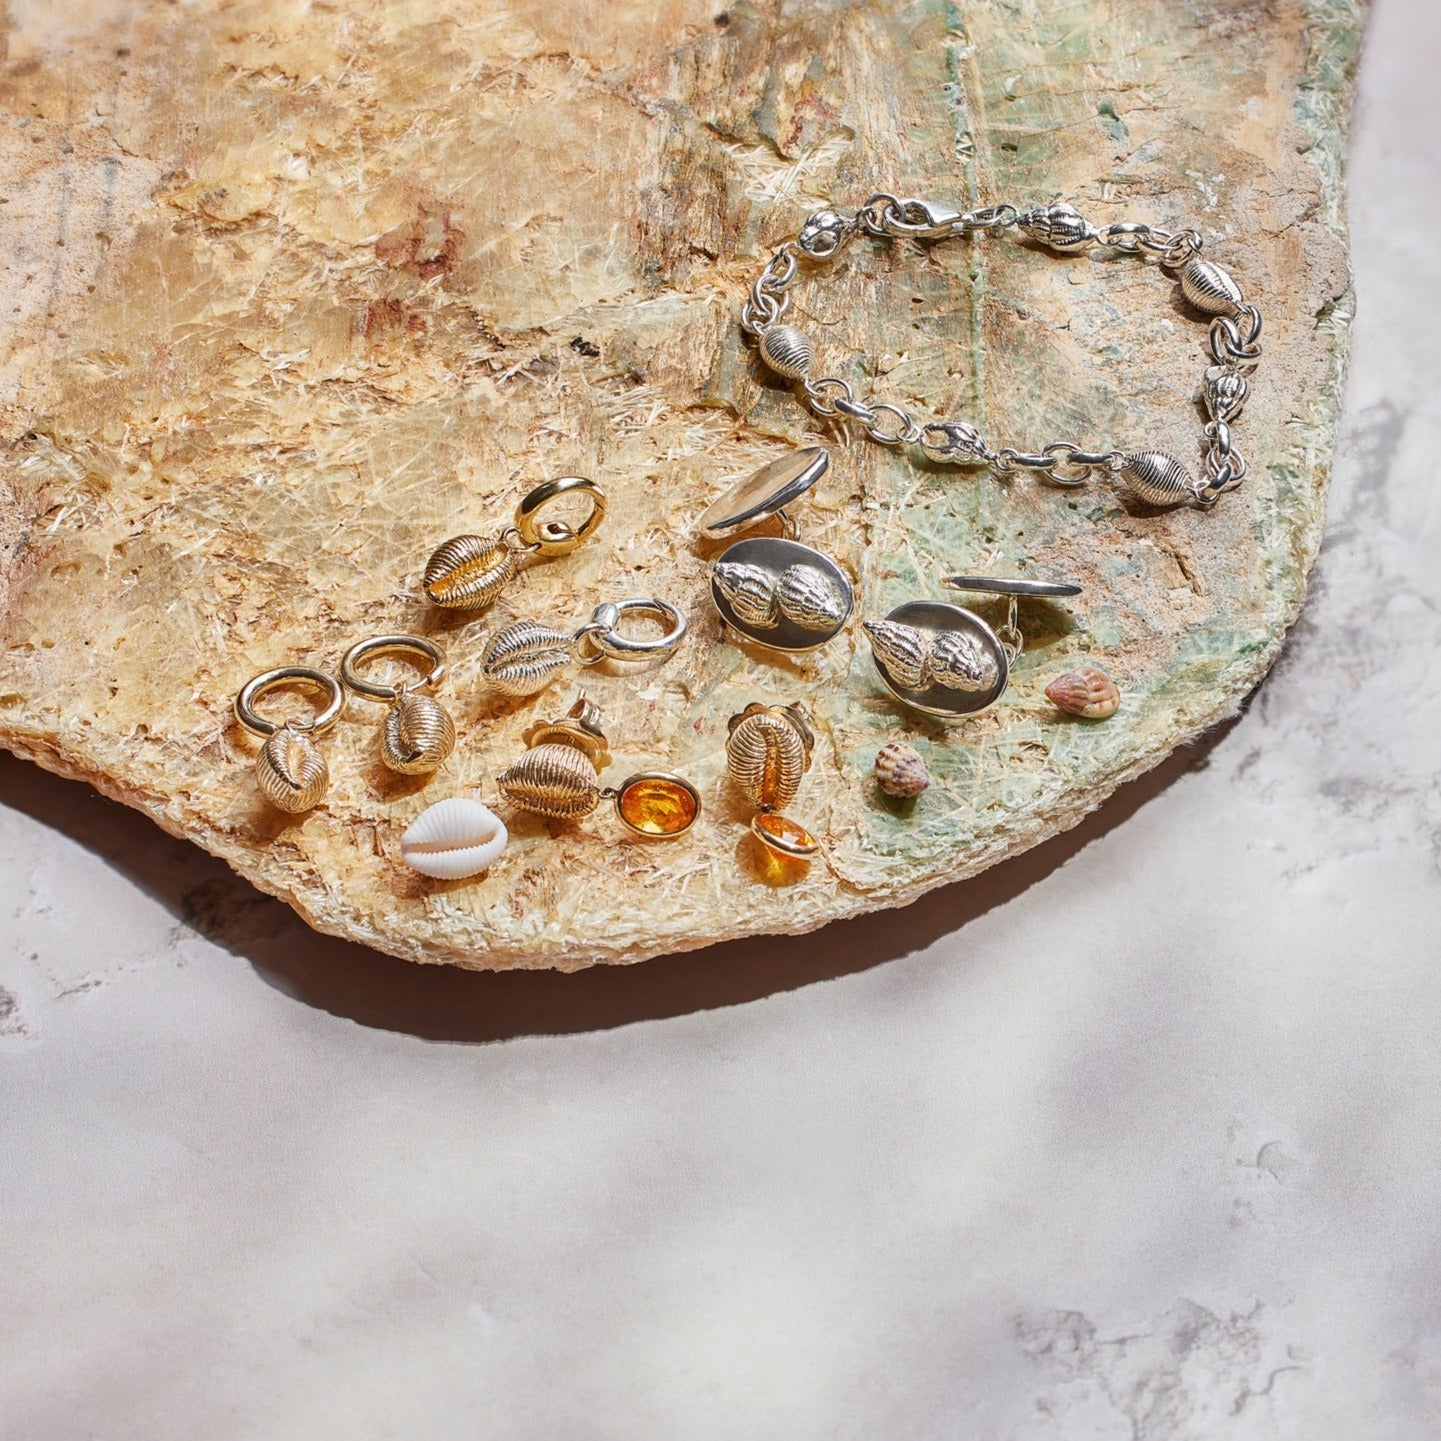 Langland stud earrings. Cowrie shell stud earrings. Mumbles jewellery. Langland Bay, Wales. Wales jewellery. Gower jewellery. Wales shell jewellery. Silver shell jewellery. Gold shell jewellery. Those Happy Places. Serena Ansell Jewellery. Cowrie earrings.